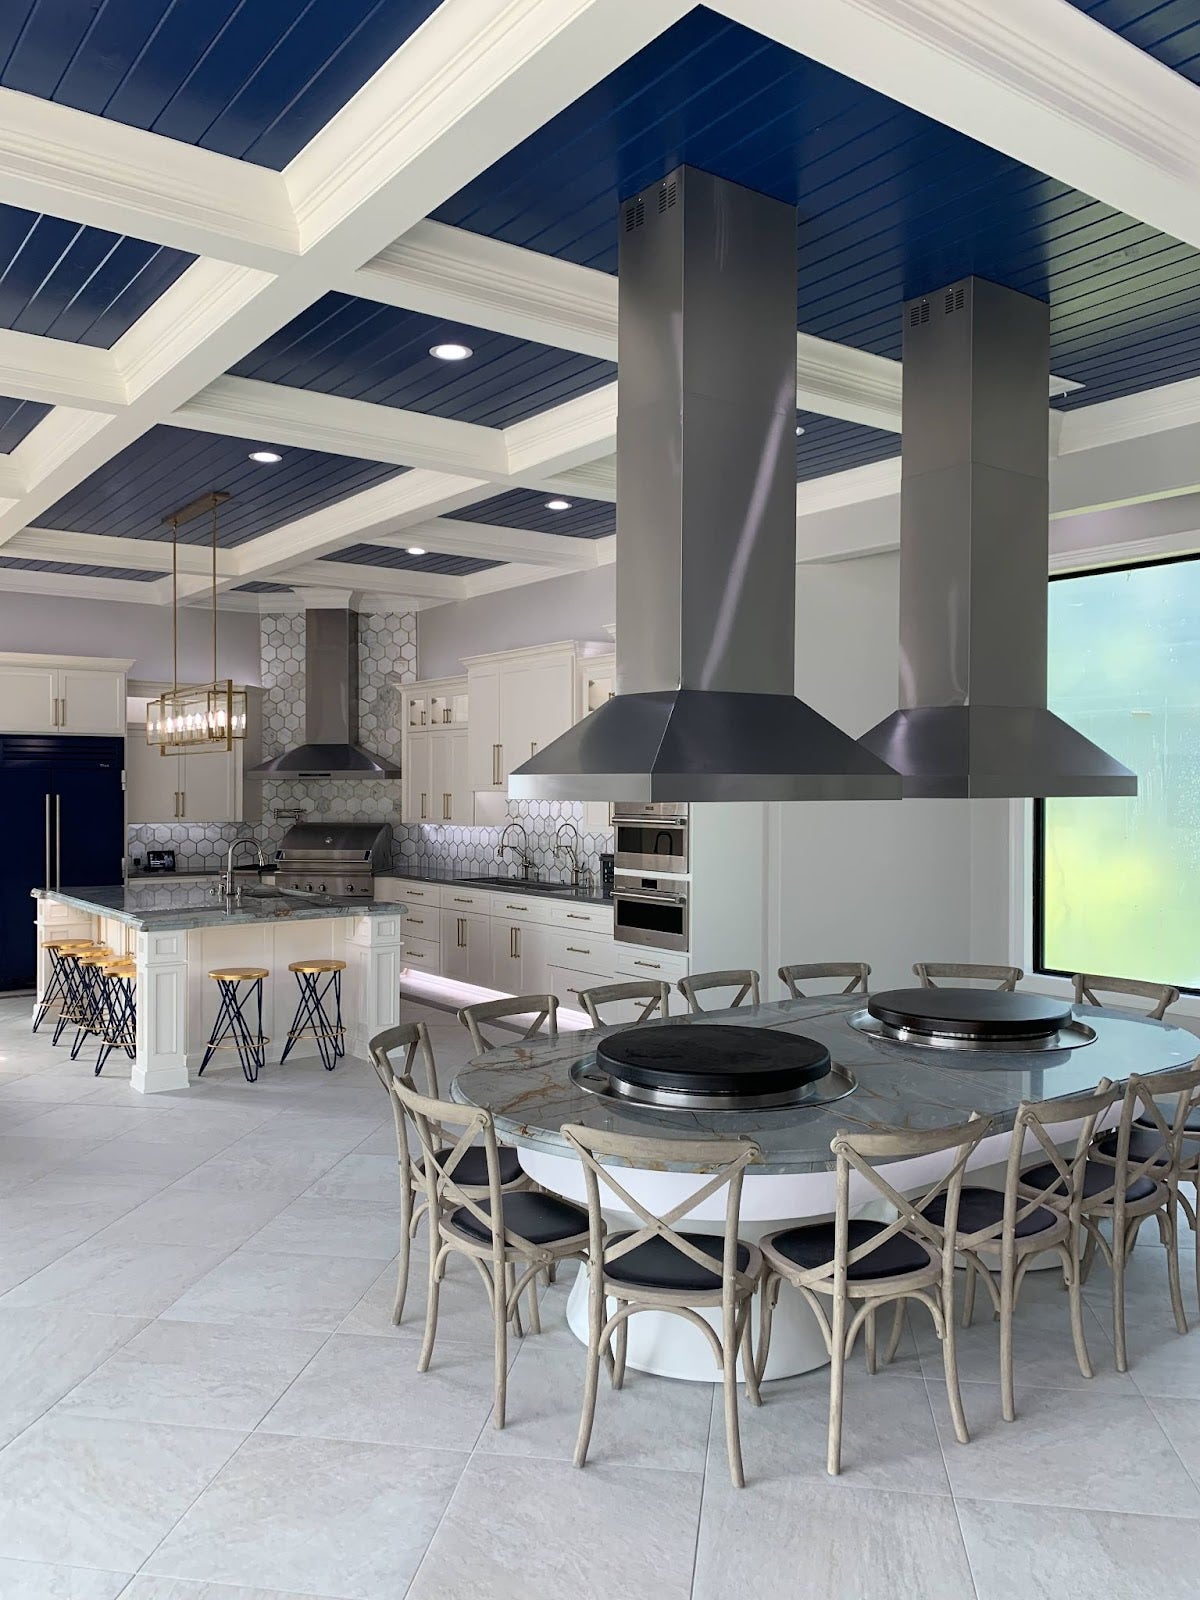 Coastal Luxe Outdoor Kitchen: Three Proline hoods vent smoke in this stunning outdoor kitchen. Blue and white color scheme creates a fresh vibe. Architectural ceiling adds a touch of luxury. Perfect for social gatherings and serious cooking. - Proline Range Hoods - prolinerangehoods.com 